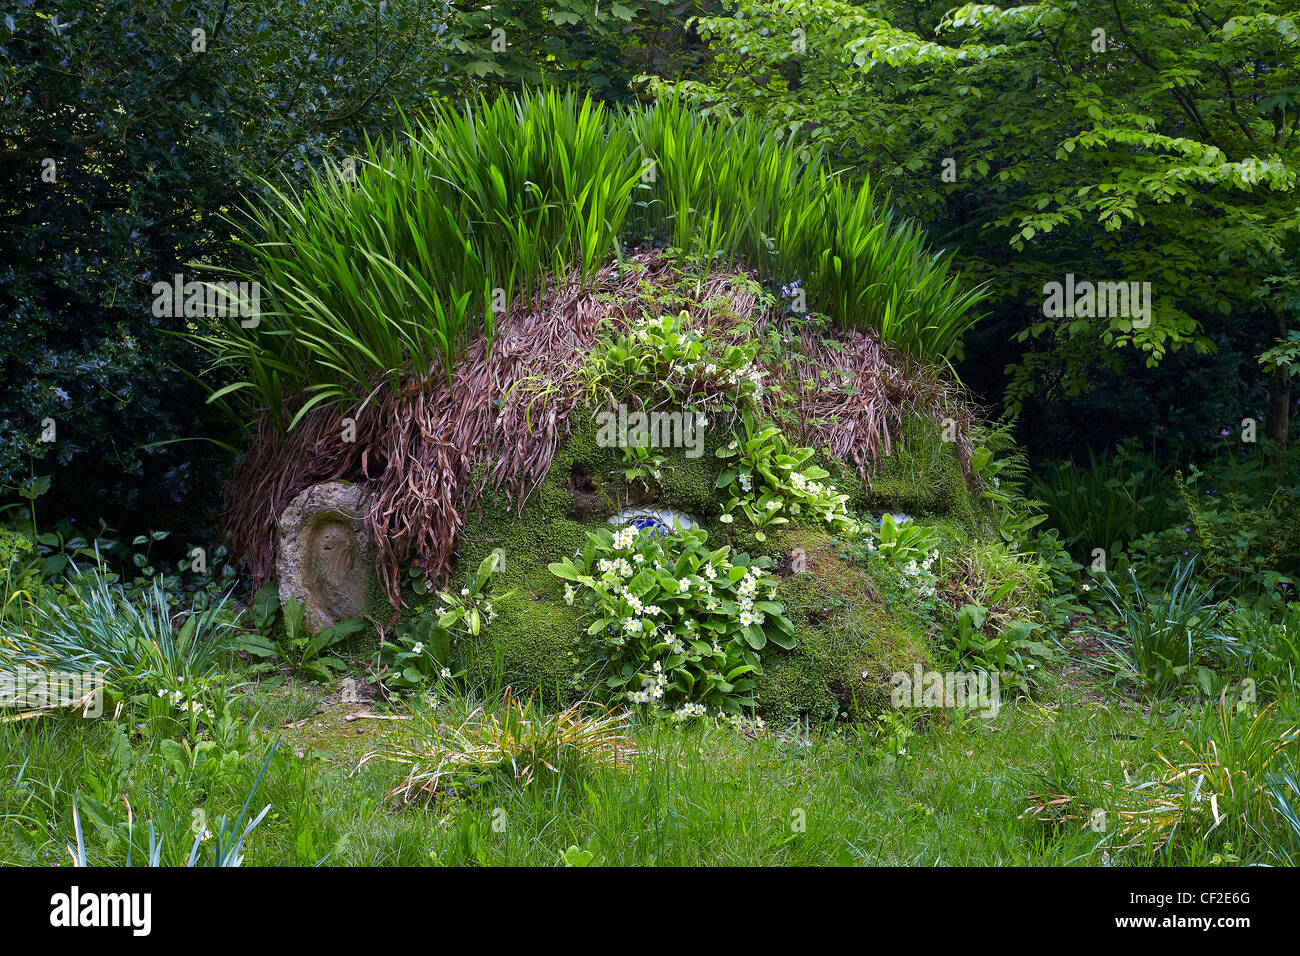 The Giant's Head along Woodland Walk at The Lost Gardens of Heligan. Stock Photo